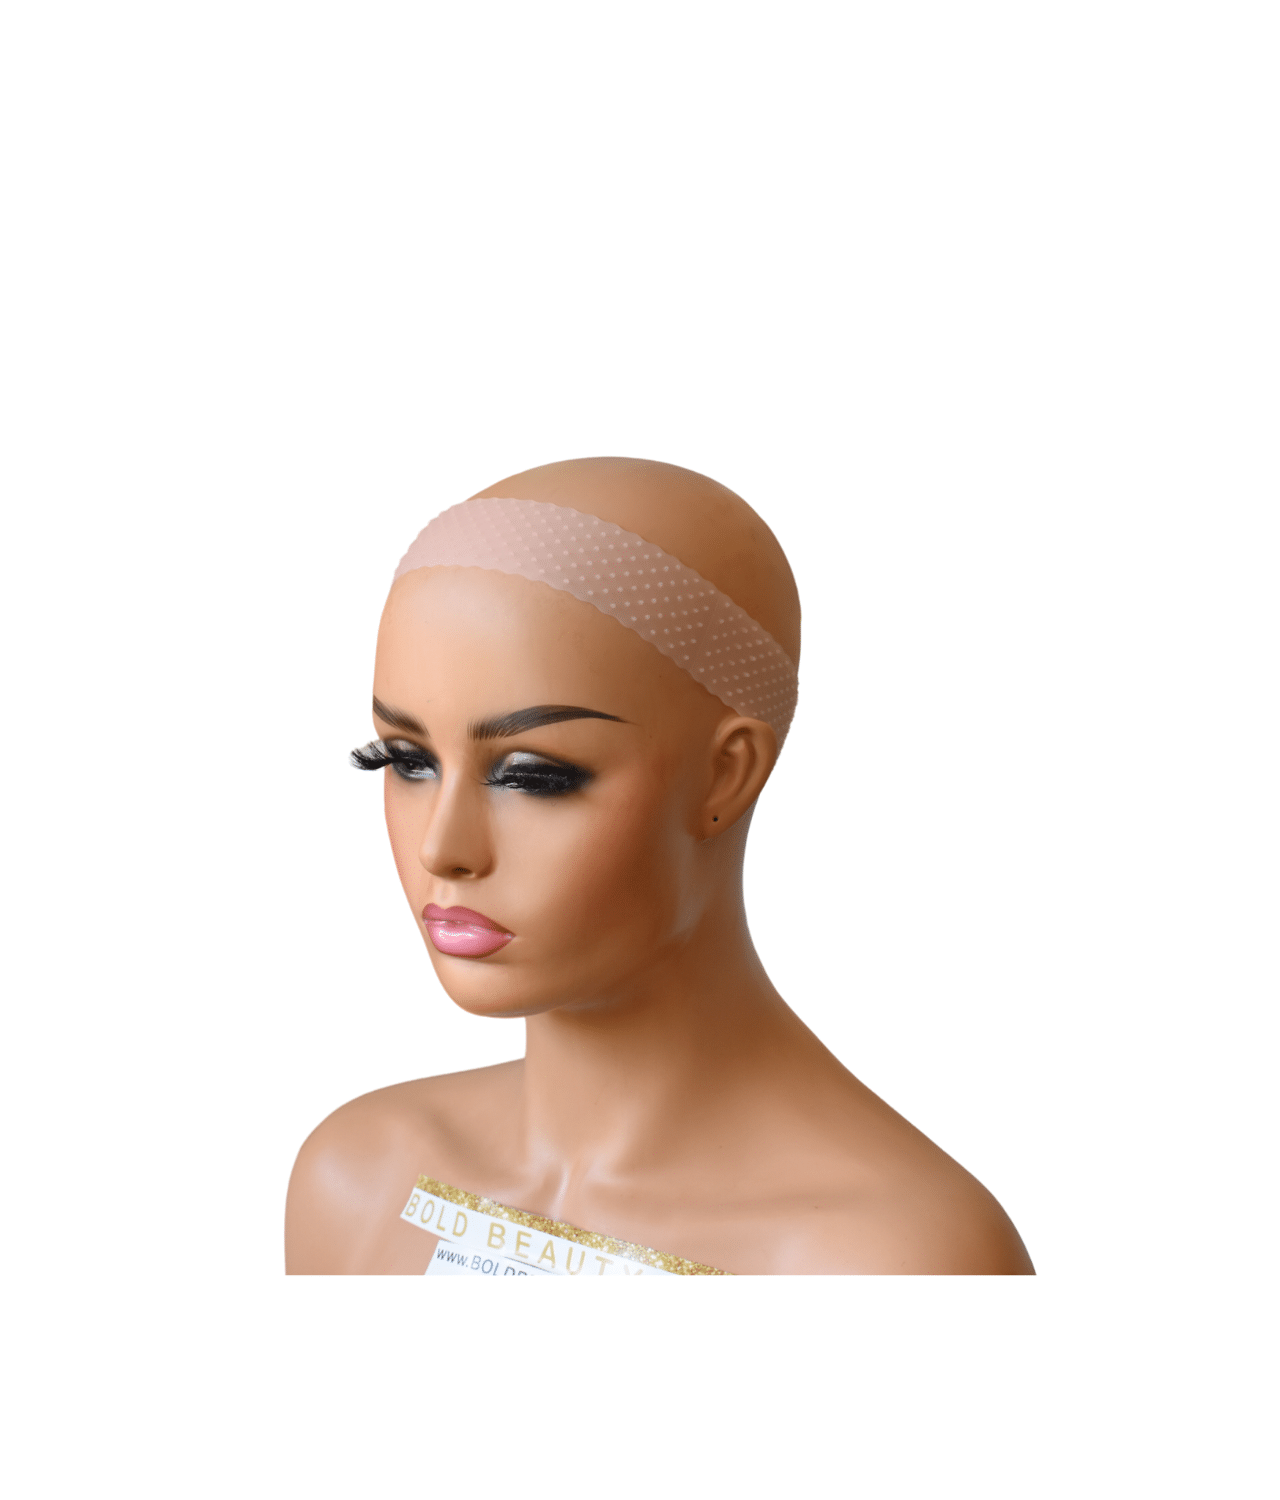 Bold Beauty Hair Bold Beautys' Silicone Wig Grip Band @ $9.99